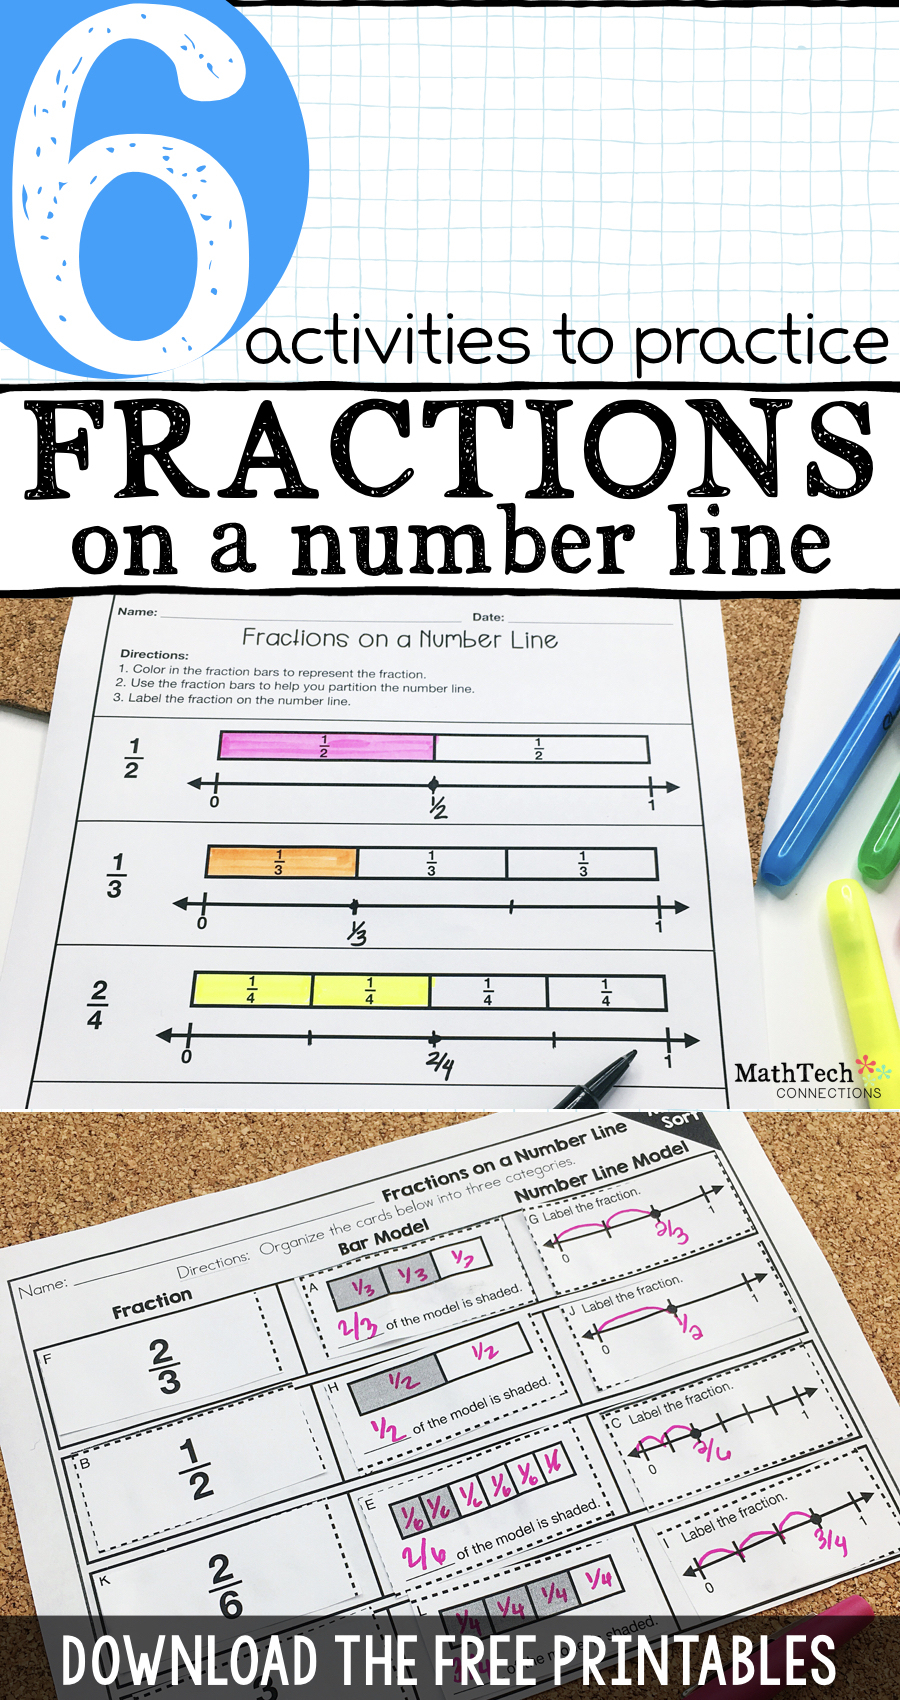 6 Activities To Practice Fractions On A Number Line - Free Printable Math Centers